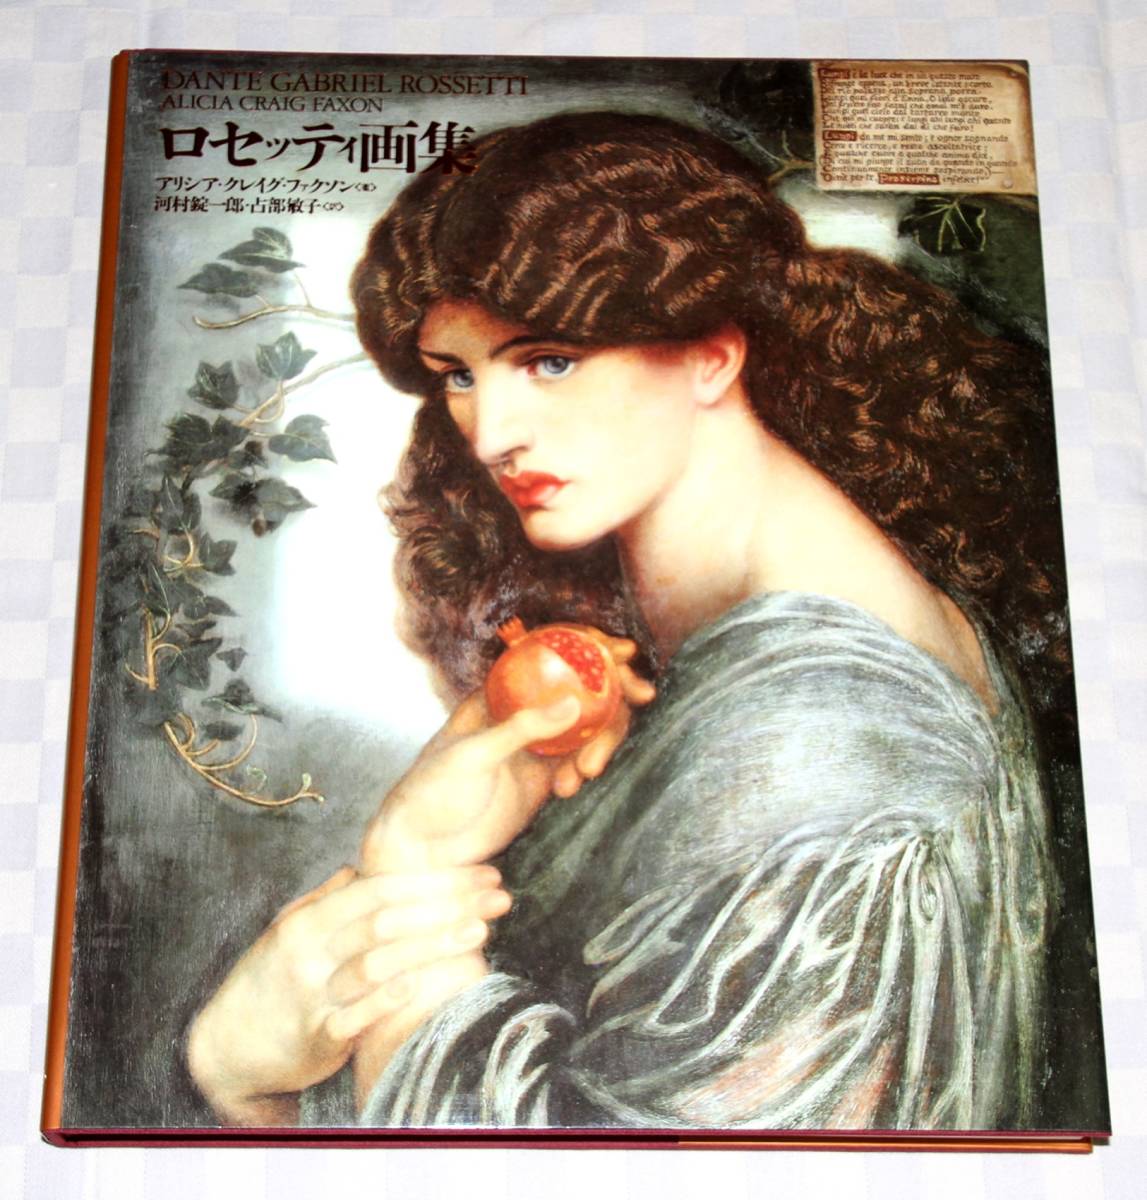  book of paintings in print ro Sette . book of paintings in print Dante *ga yellowtail L *ro Sette . river . pills one . translation case attaching large book@ used book@ rough . L front .